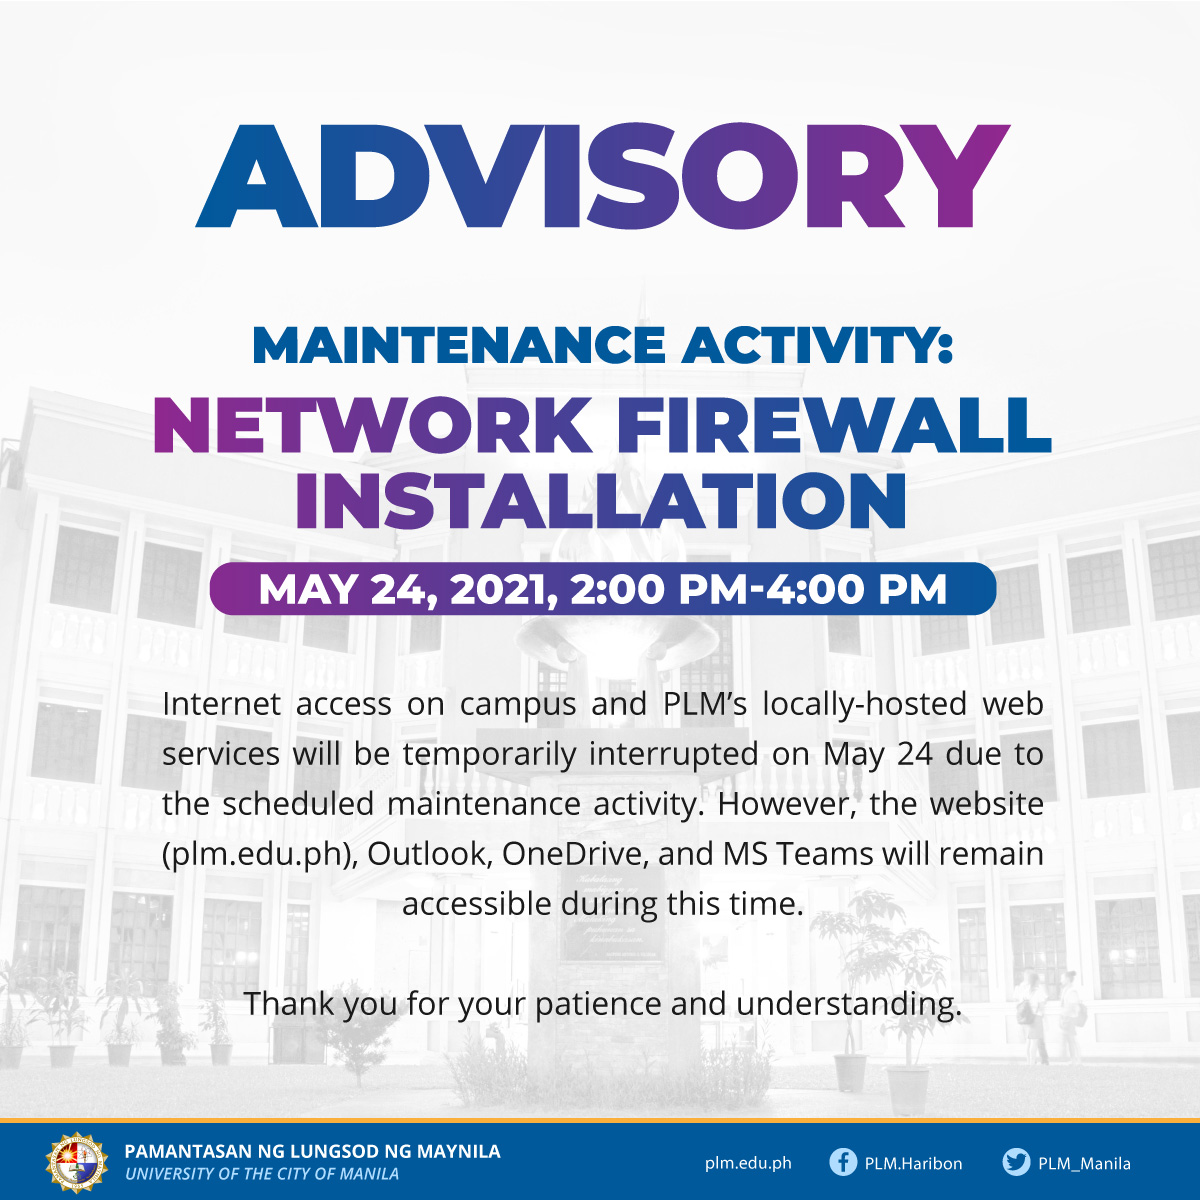 Scheduled network maintenance on May 24, 2021